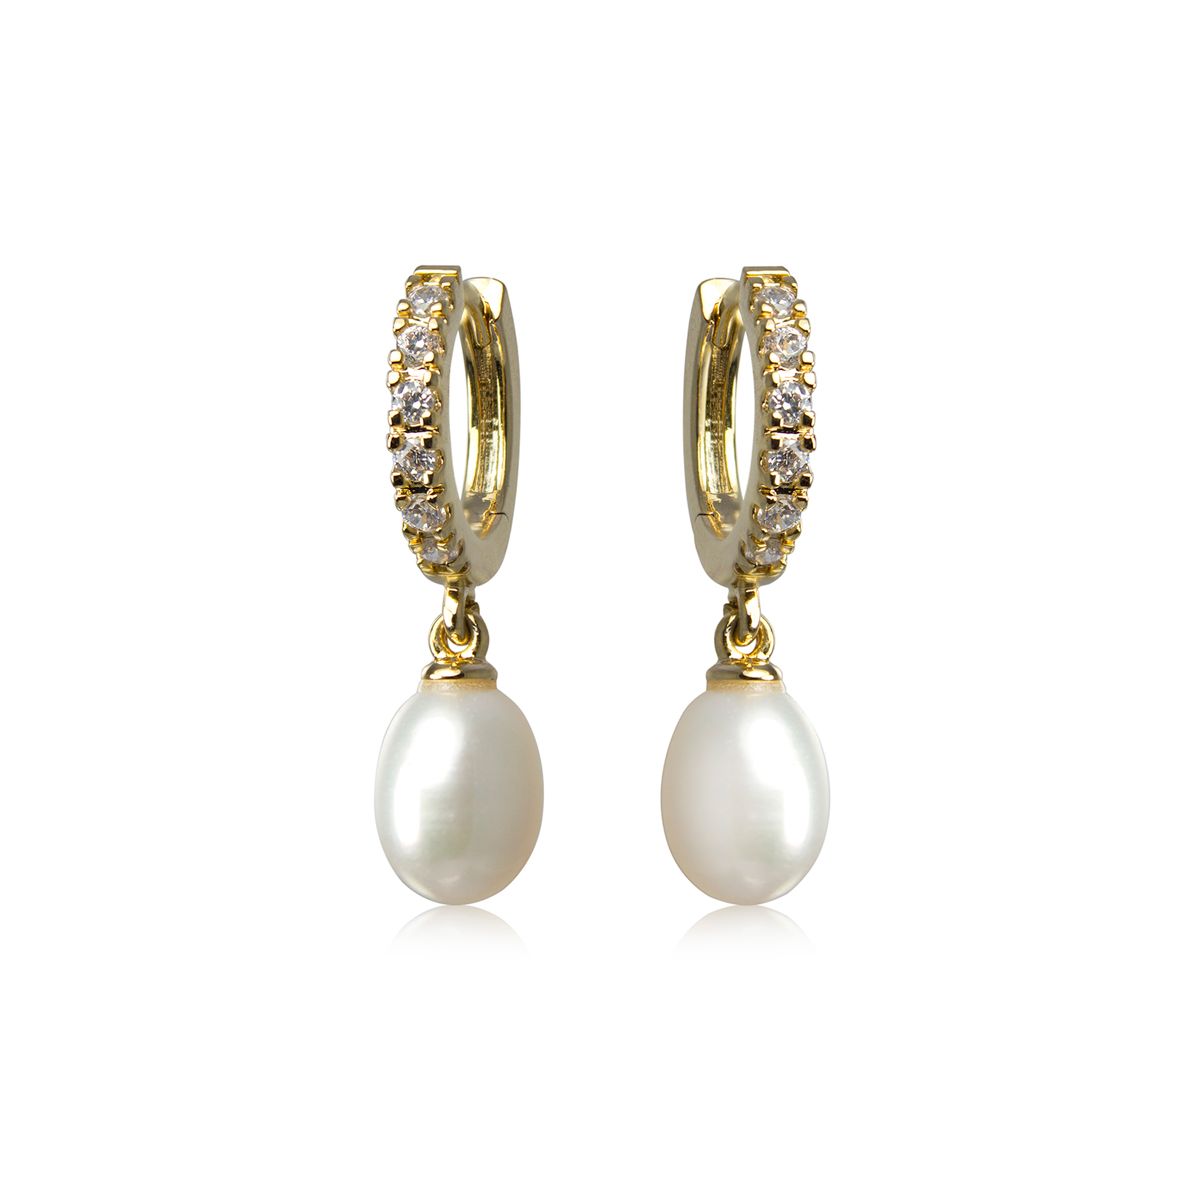 Buy Buckingham Palace Gold Pearl Earrings | Official Royal Gifts